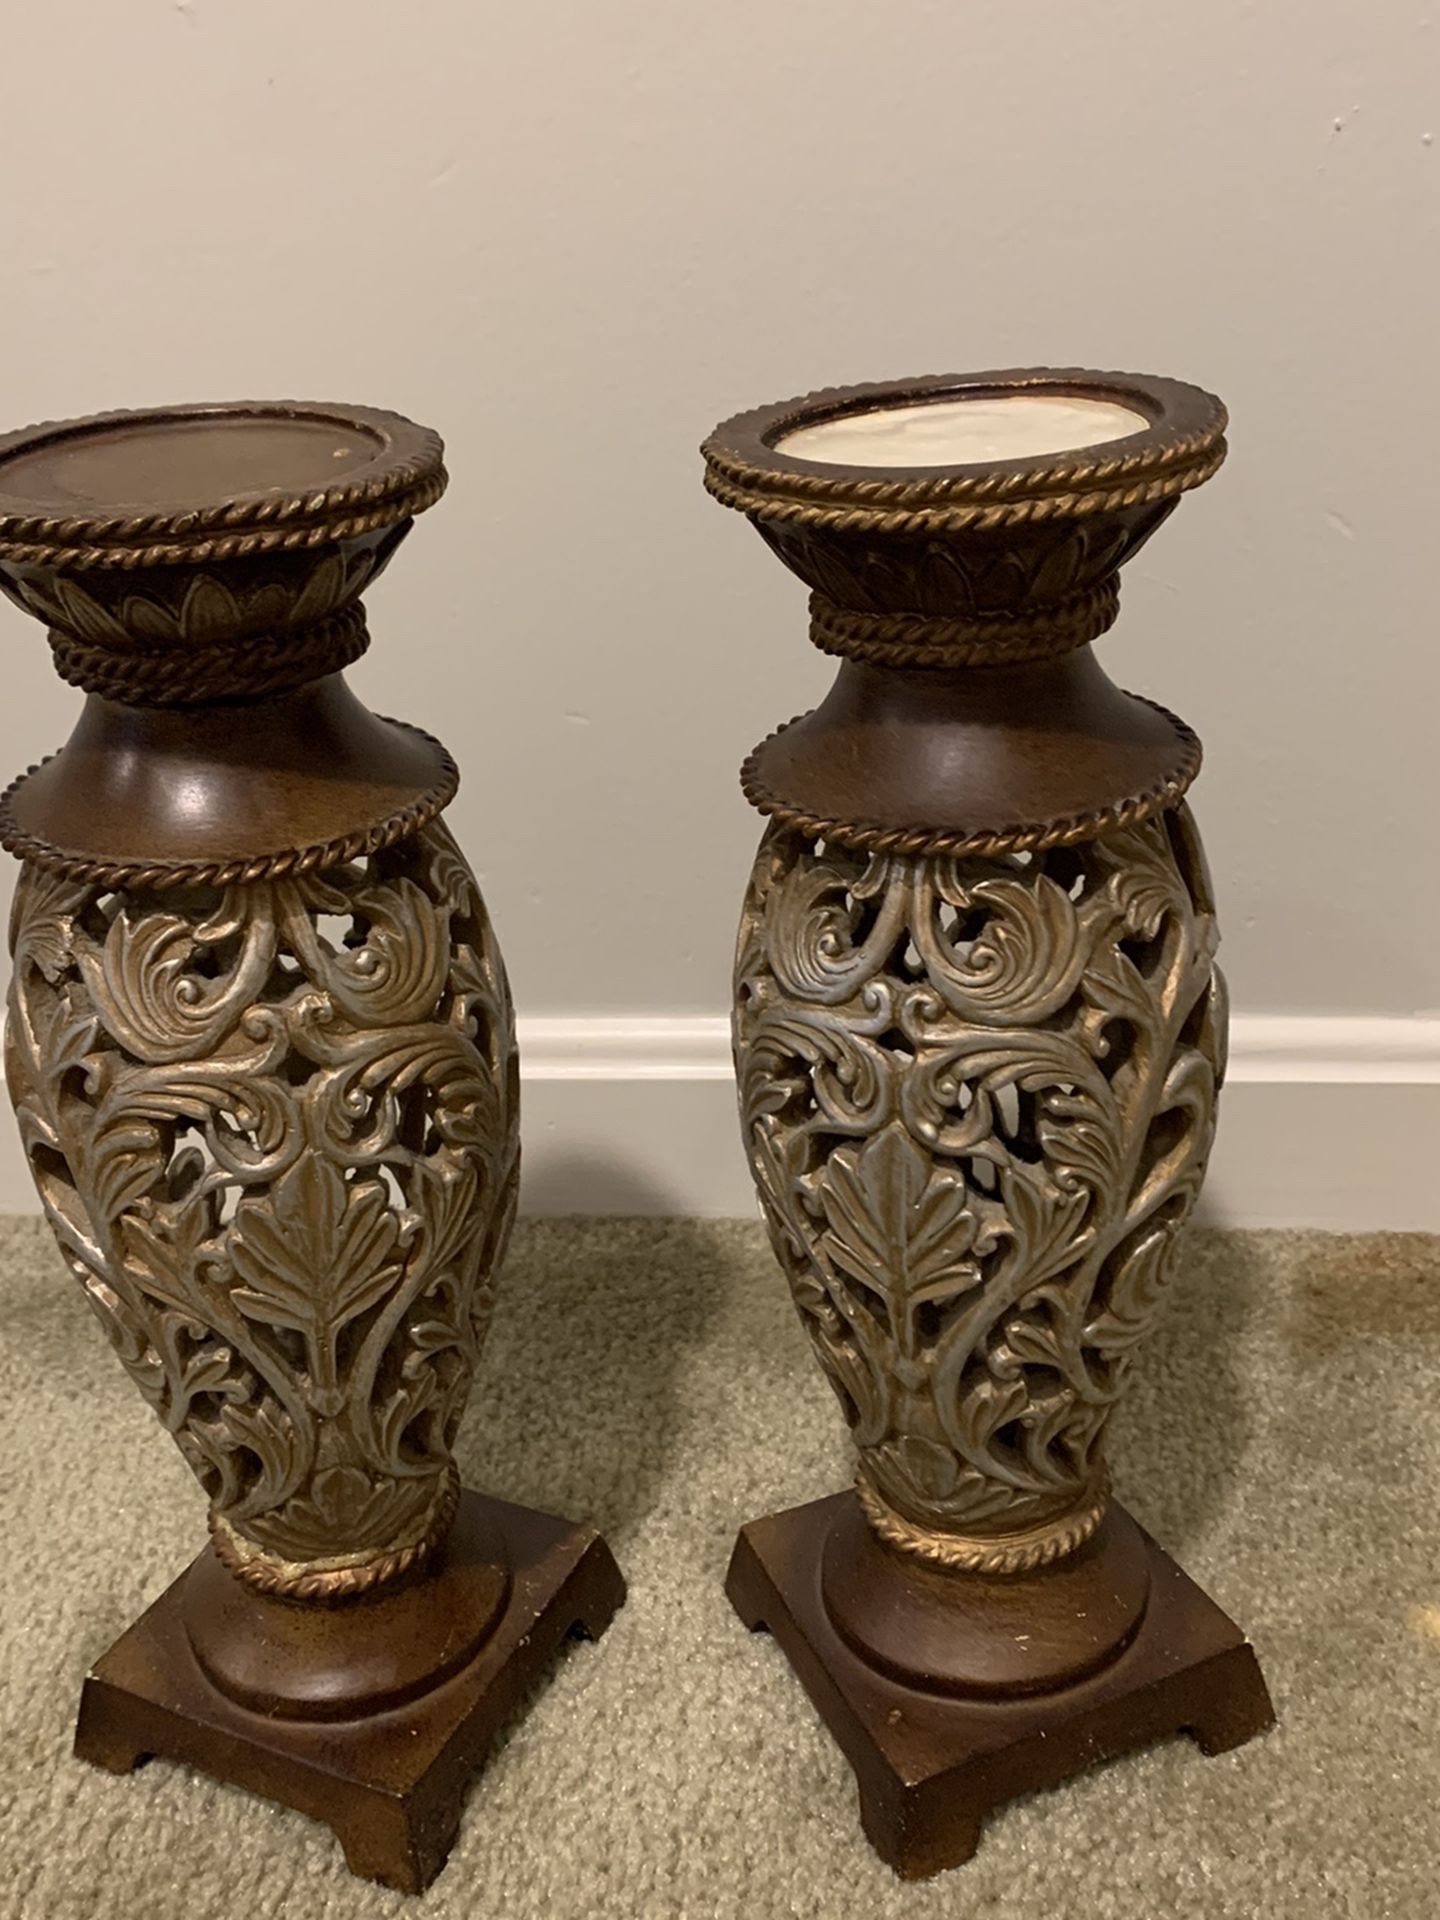 Candle Holder 2 For $10